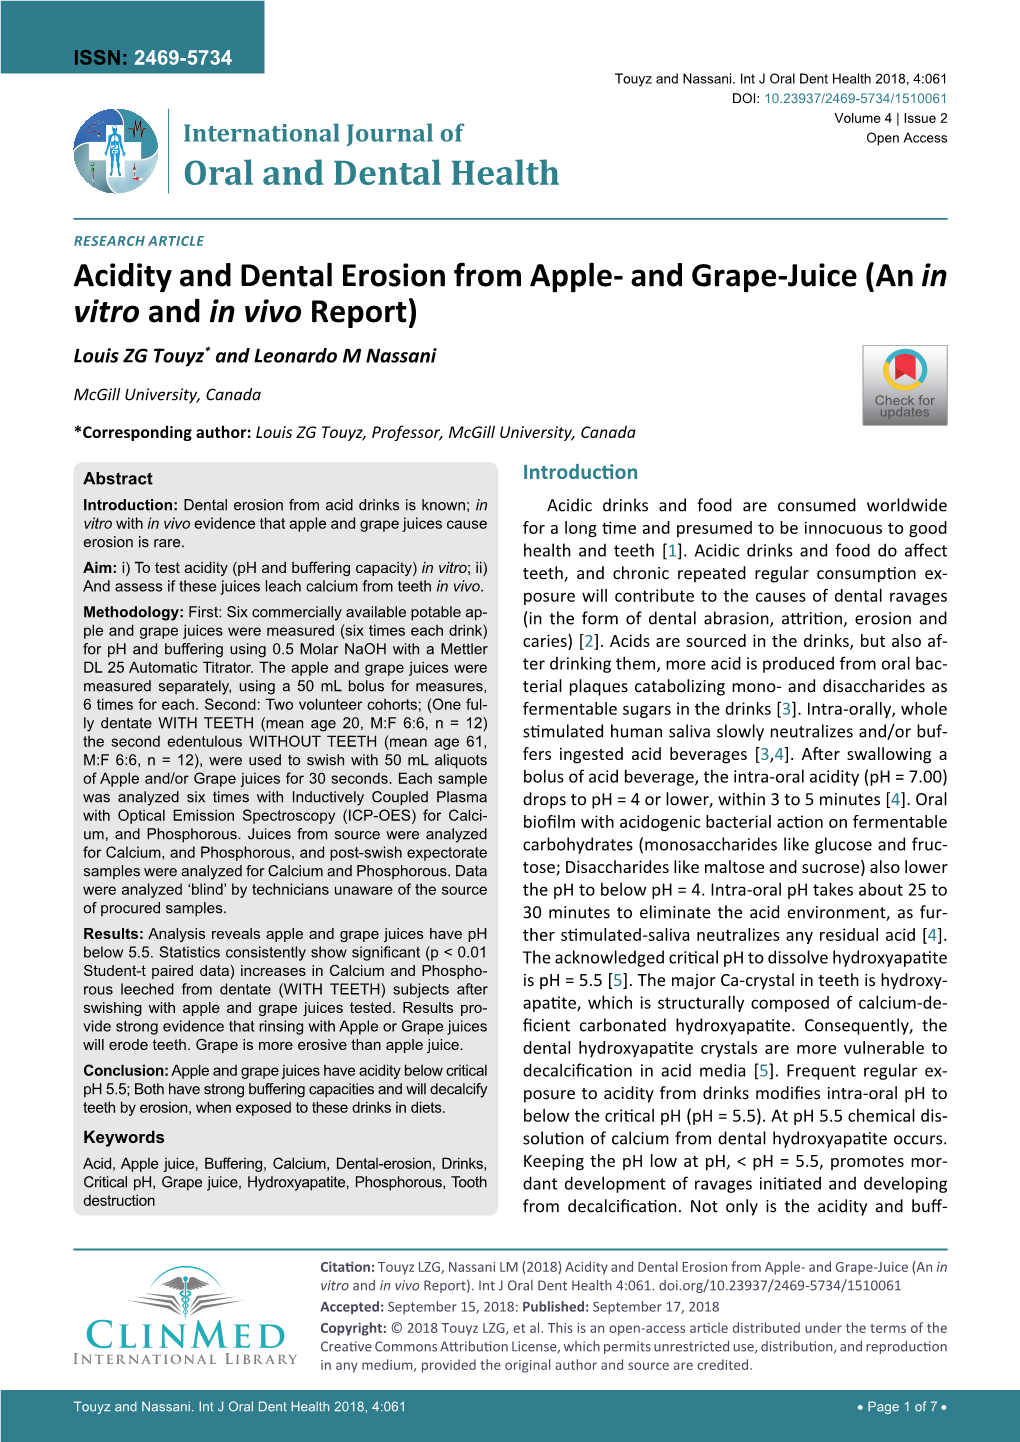 Acidity and Dental Erosion from Apple- and Grape-Juice (An in Vitro and in Vivo Report) Louis ZG Touyz* and Leonardo M Nassani